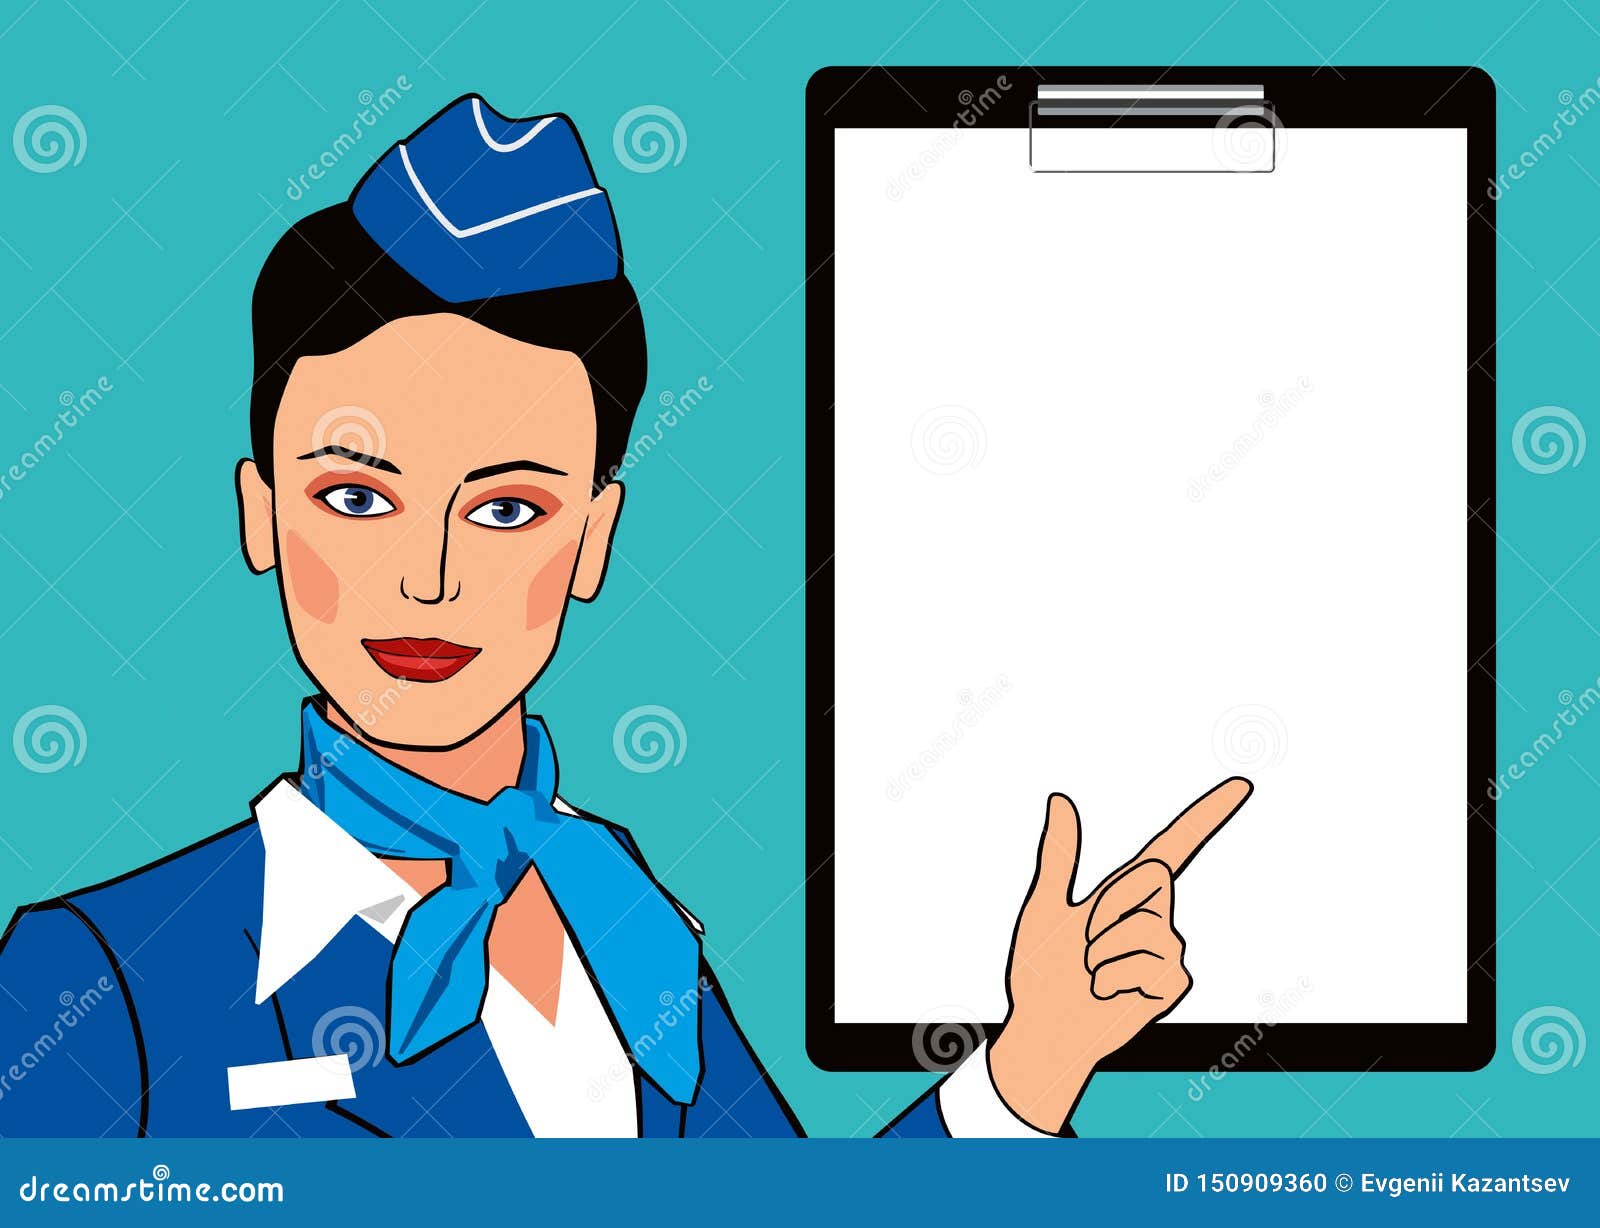 Download Pop Art Mockup Stewardess And Blank Sheet For Text ...